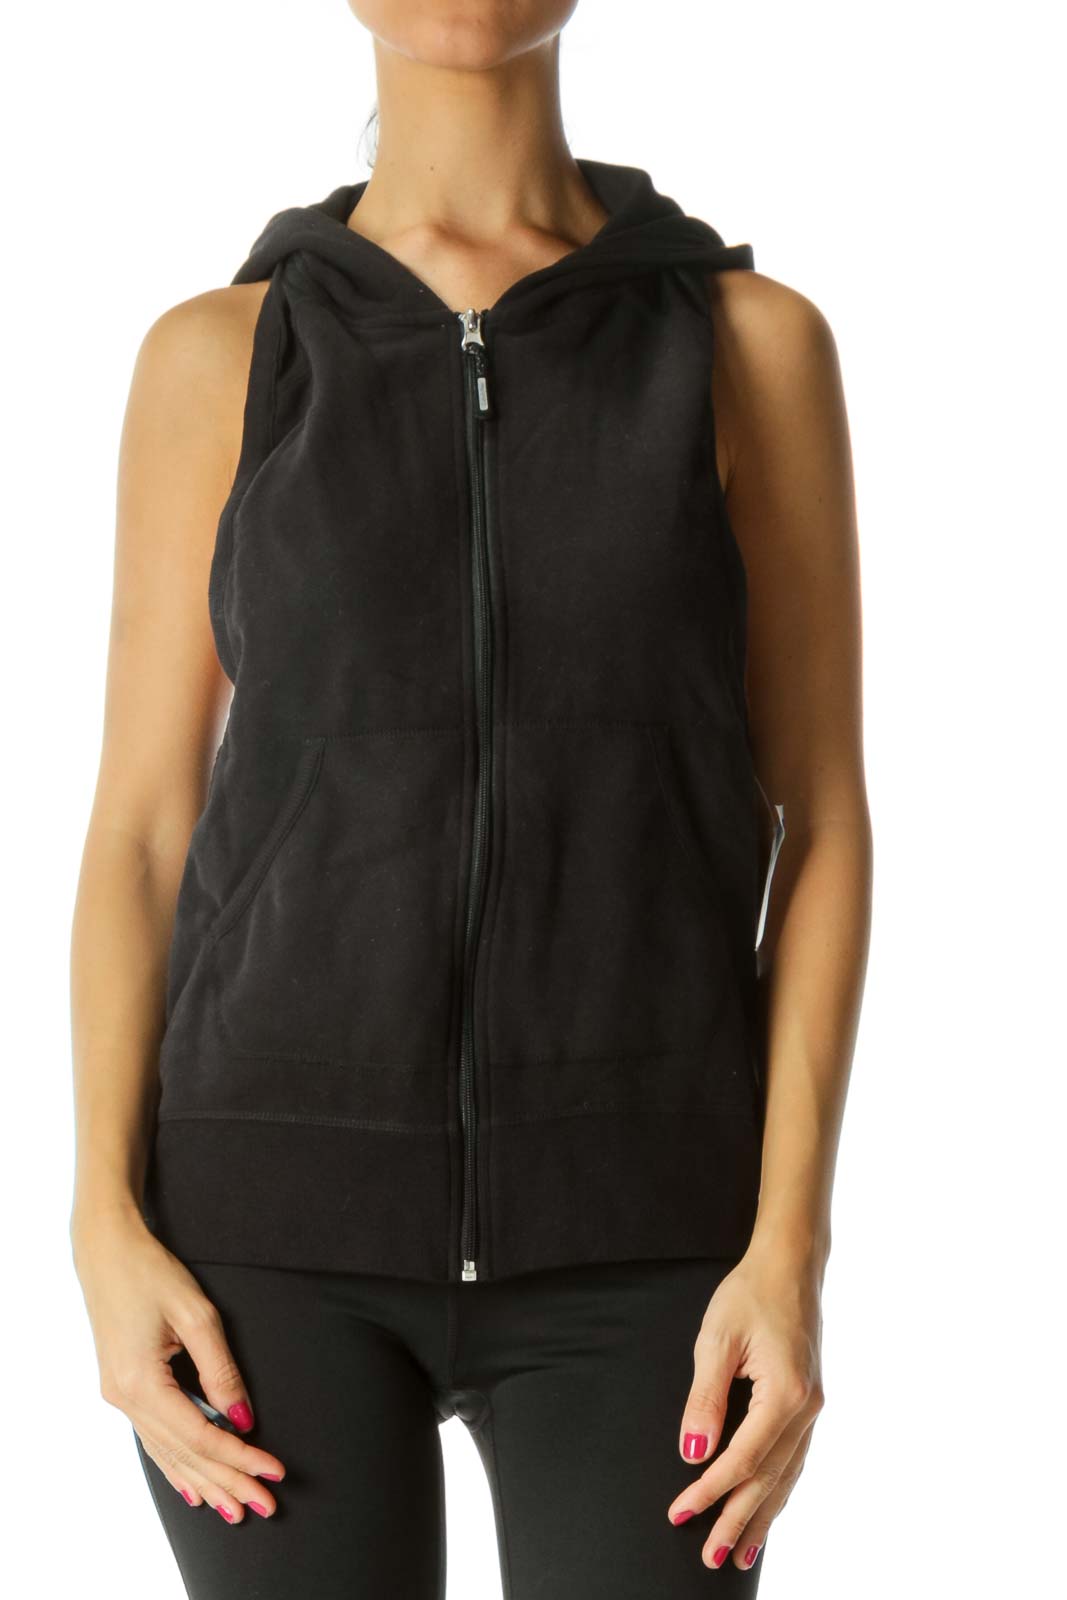 Black Mesh Material Hooded Quick-Dry Sweat Vest Front